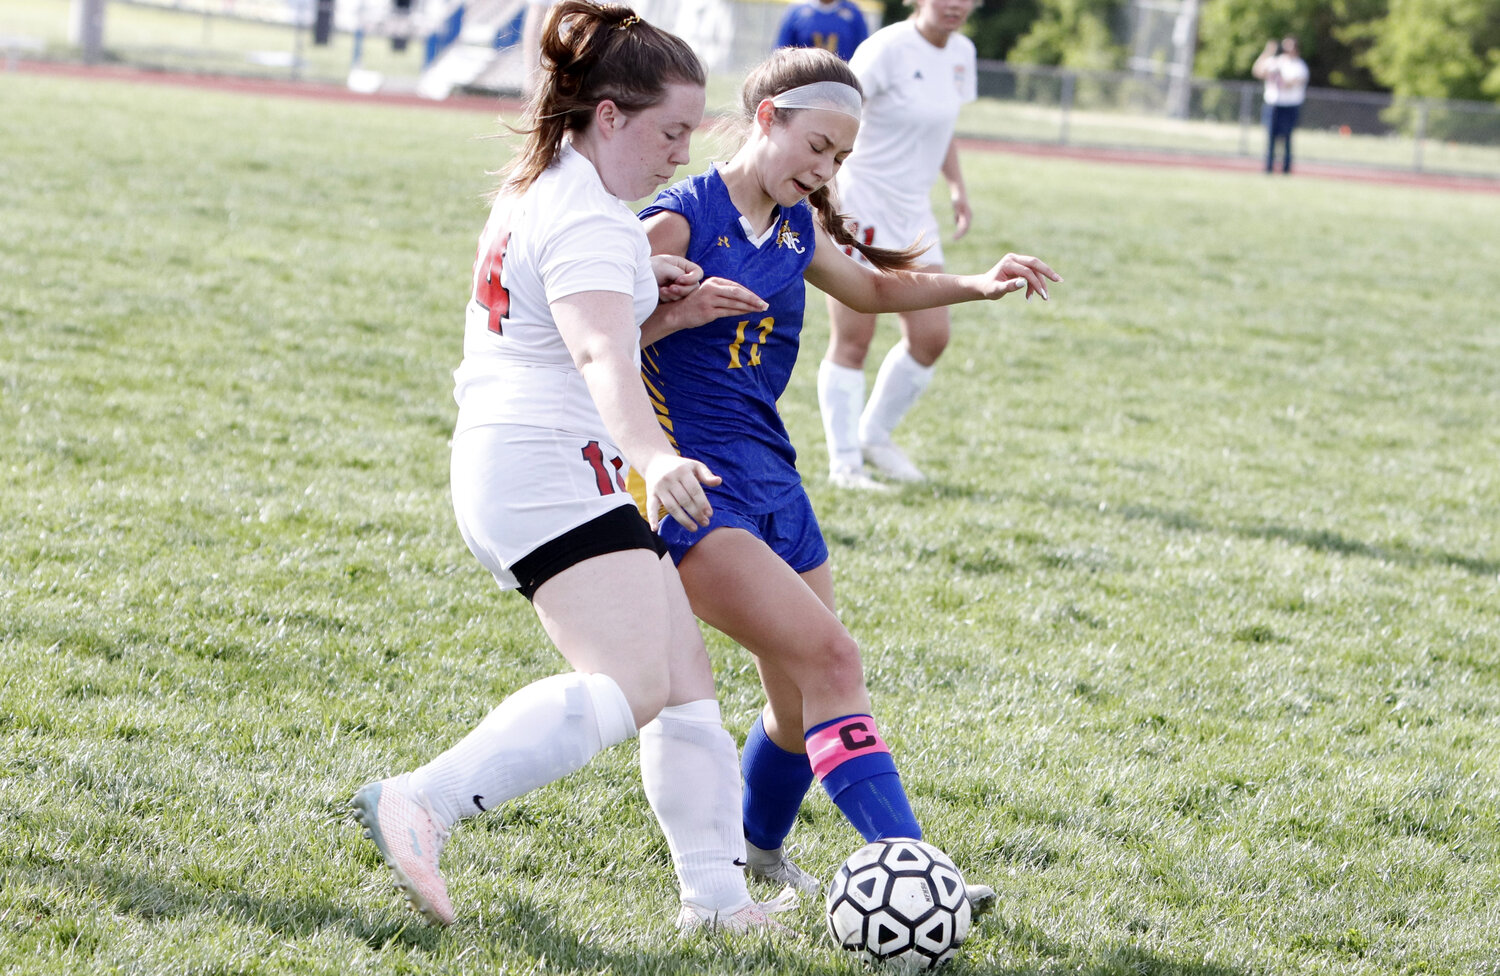 Paige Kirn (right) attempts to gain possession of the ball during the first half of last week's game.